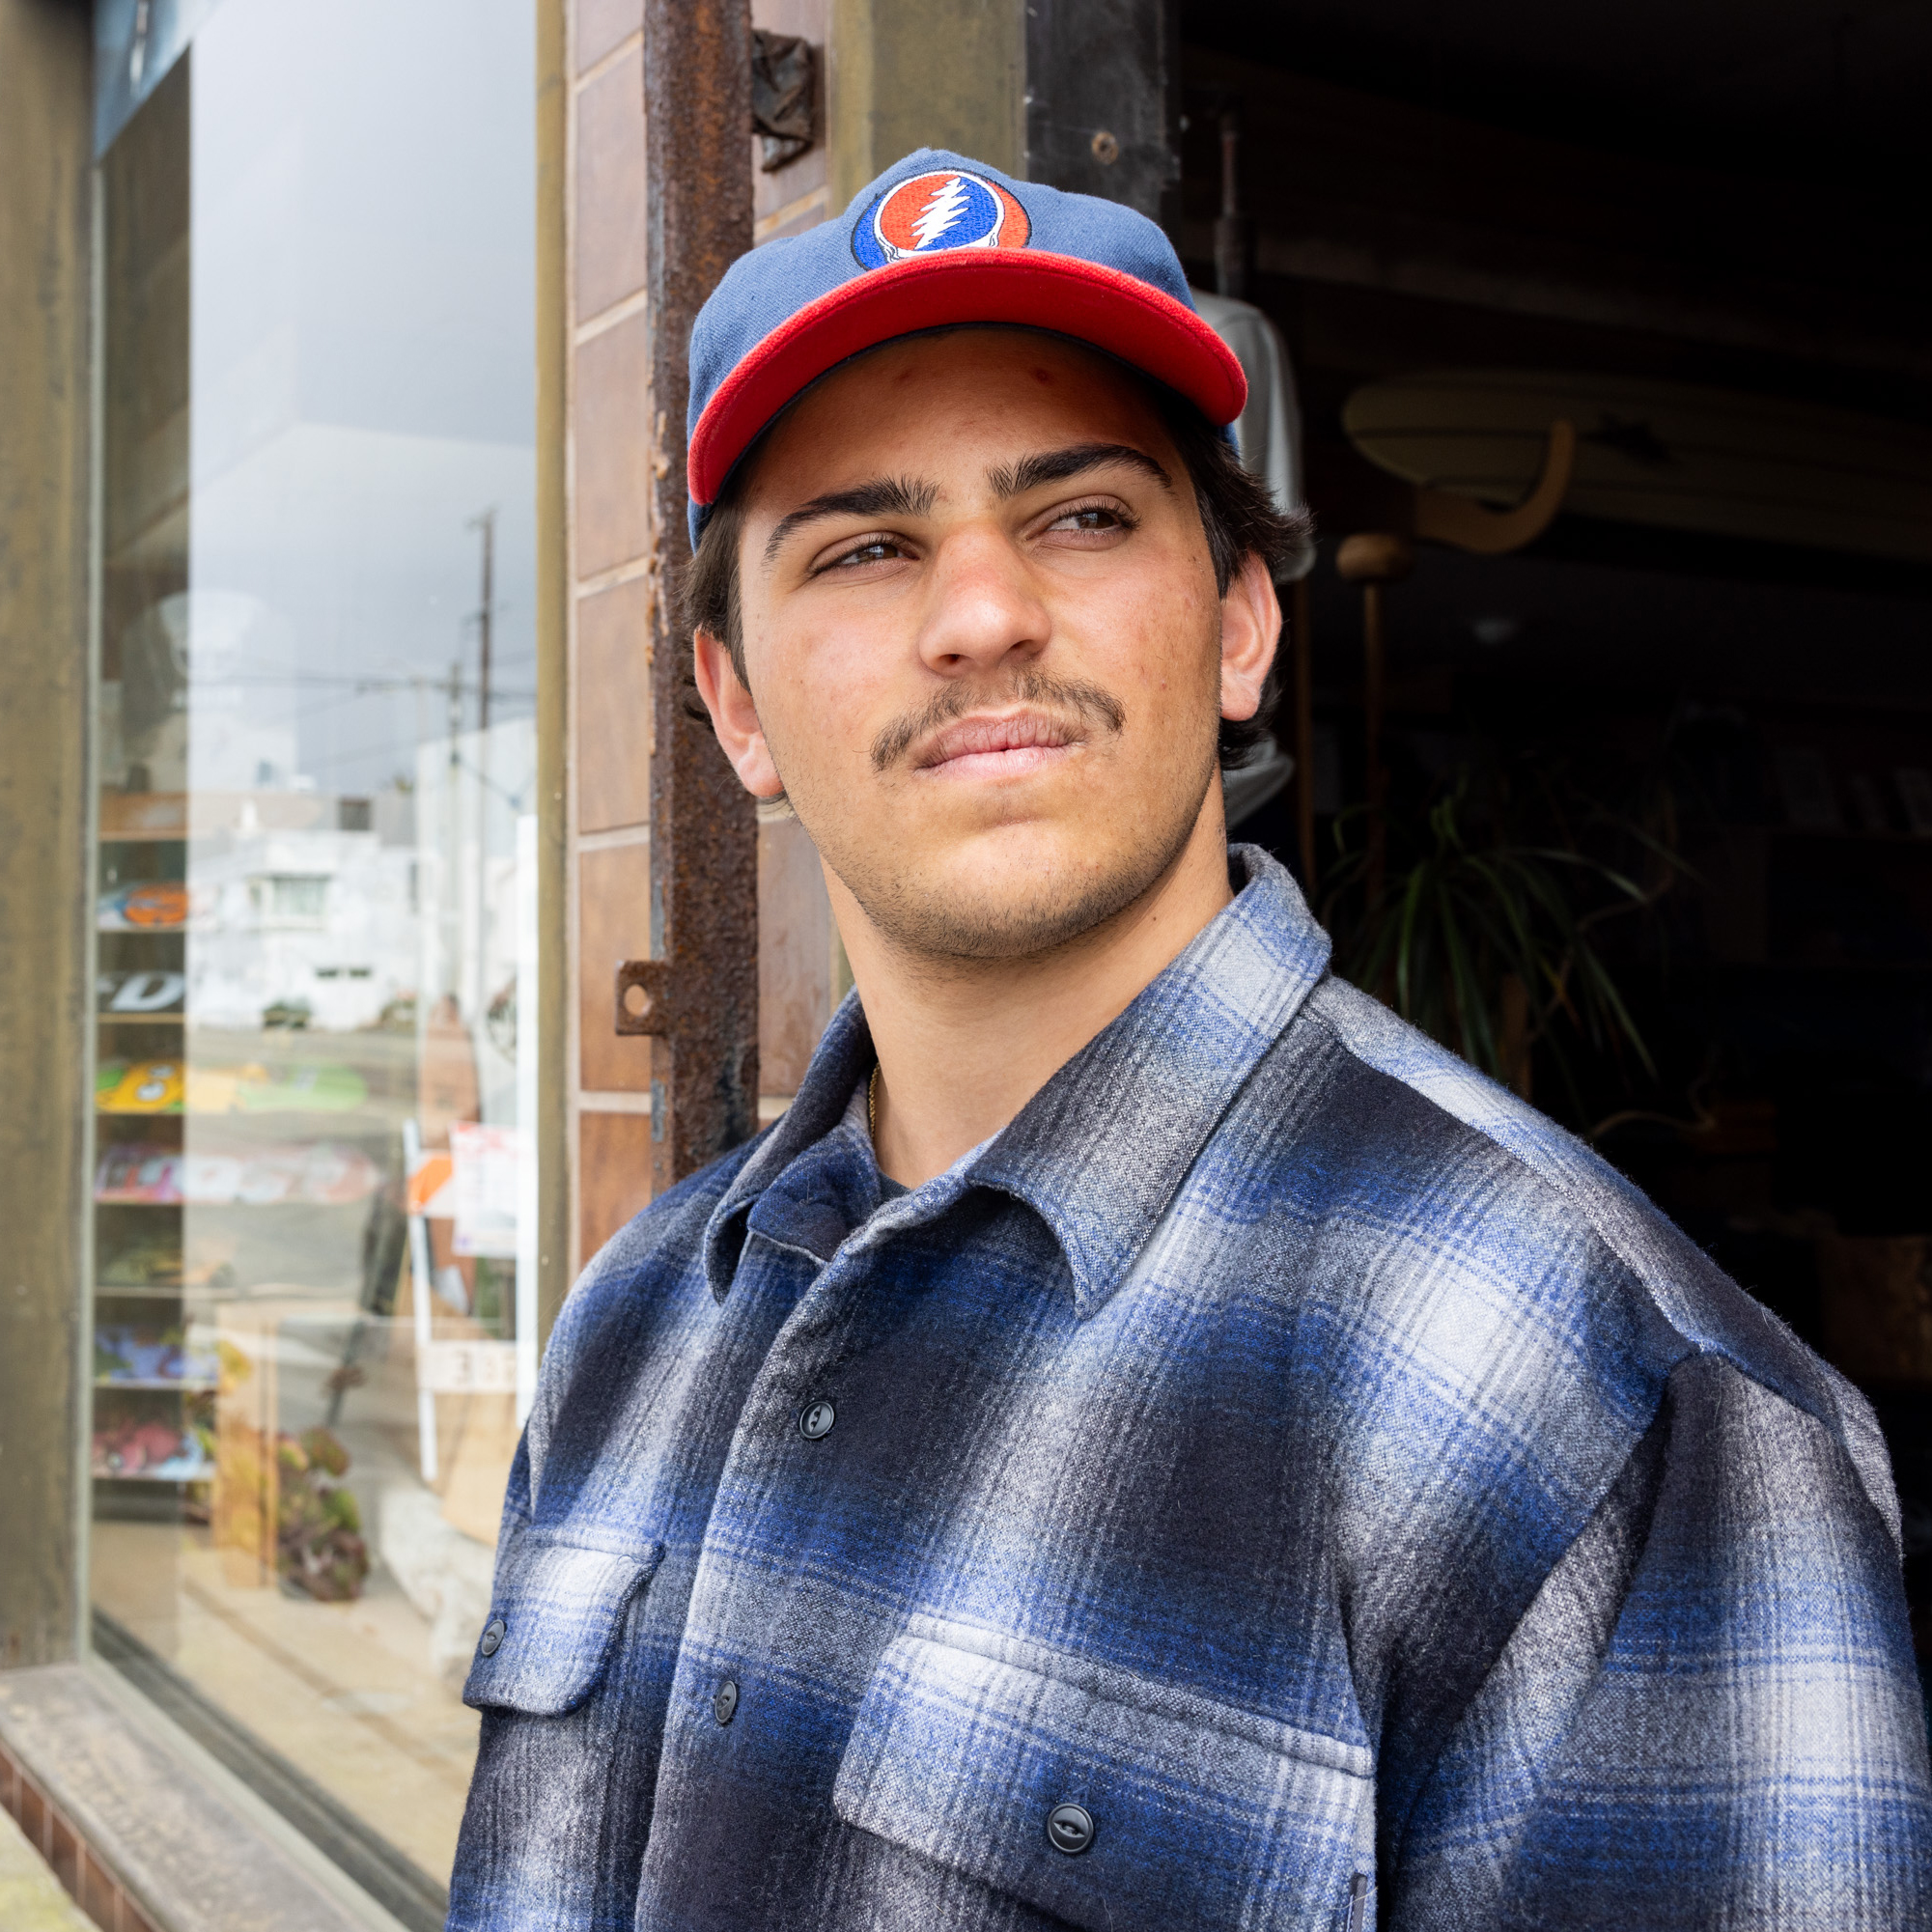 A man with a mustache wears a blue and red cap and a blue plaid shirt, standing outside a shop with a glass window, looking into the distance.